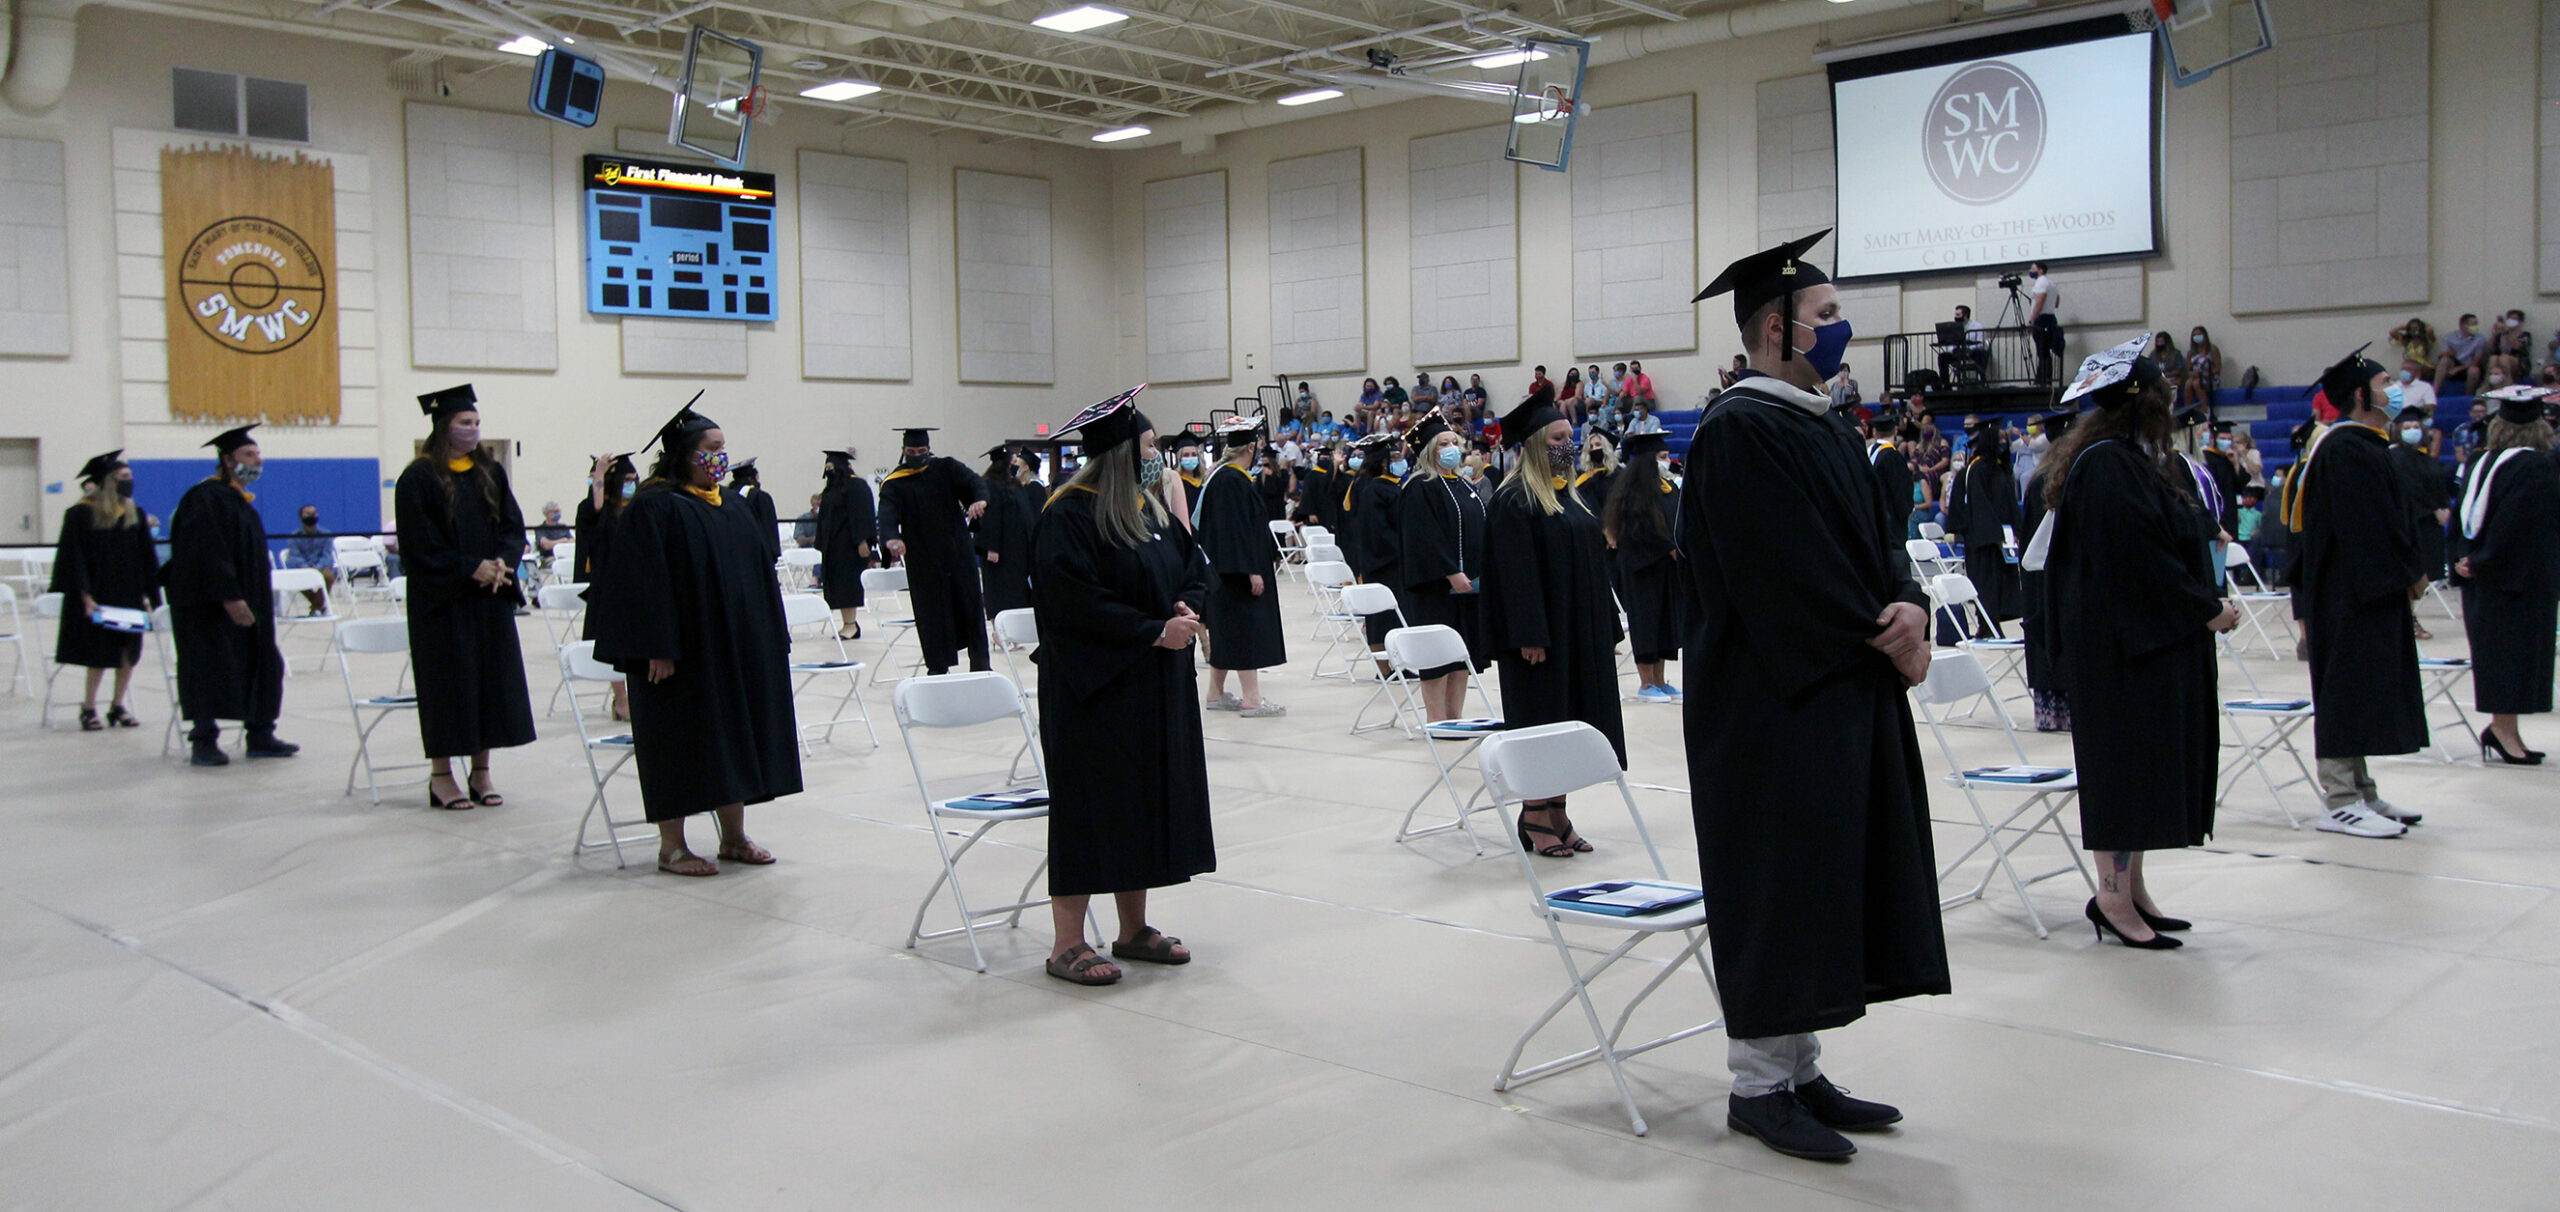 Graduates standing at commencement